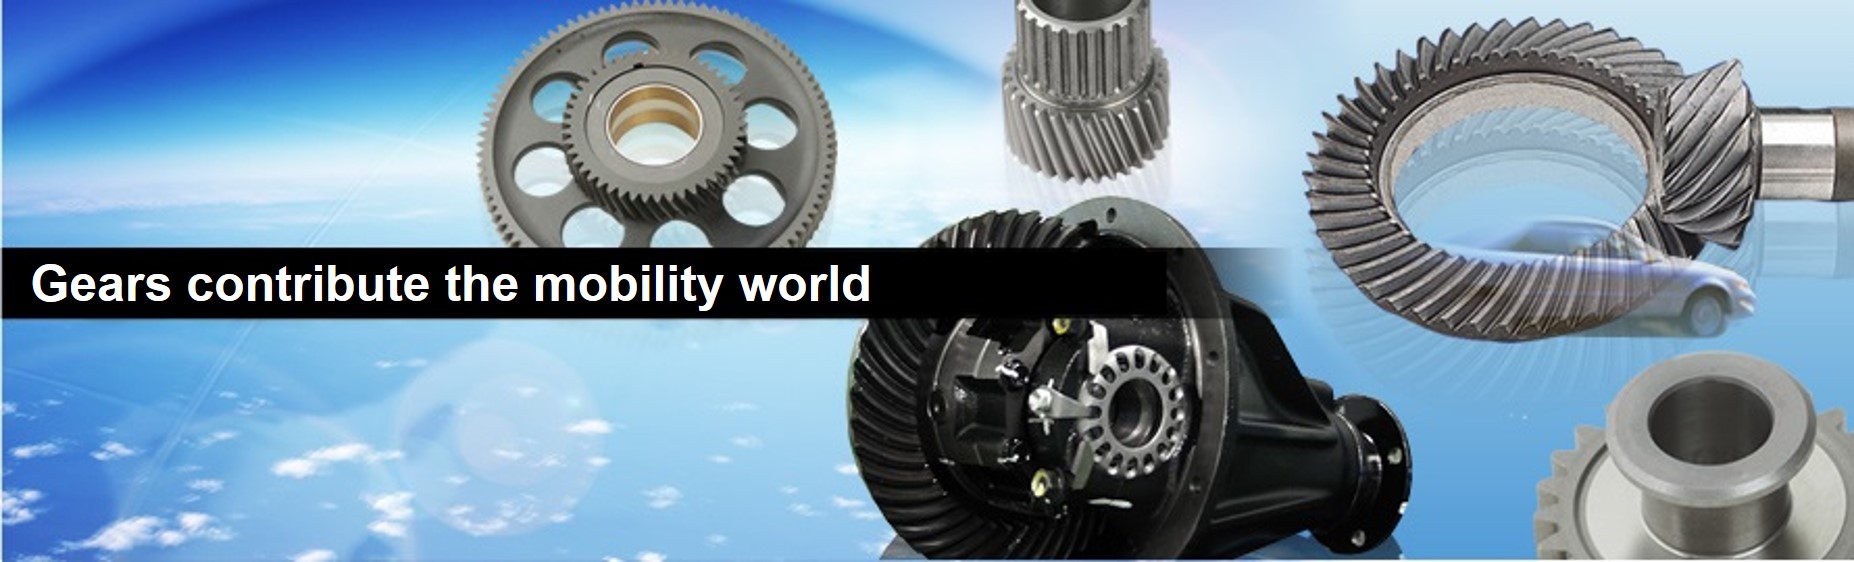 Gears contribute the mobility world